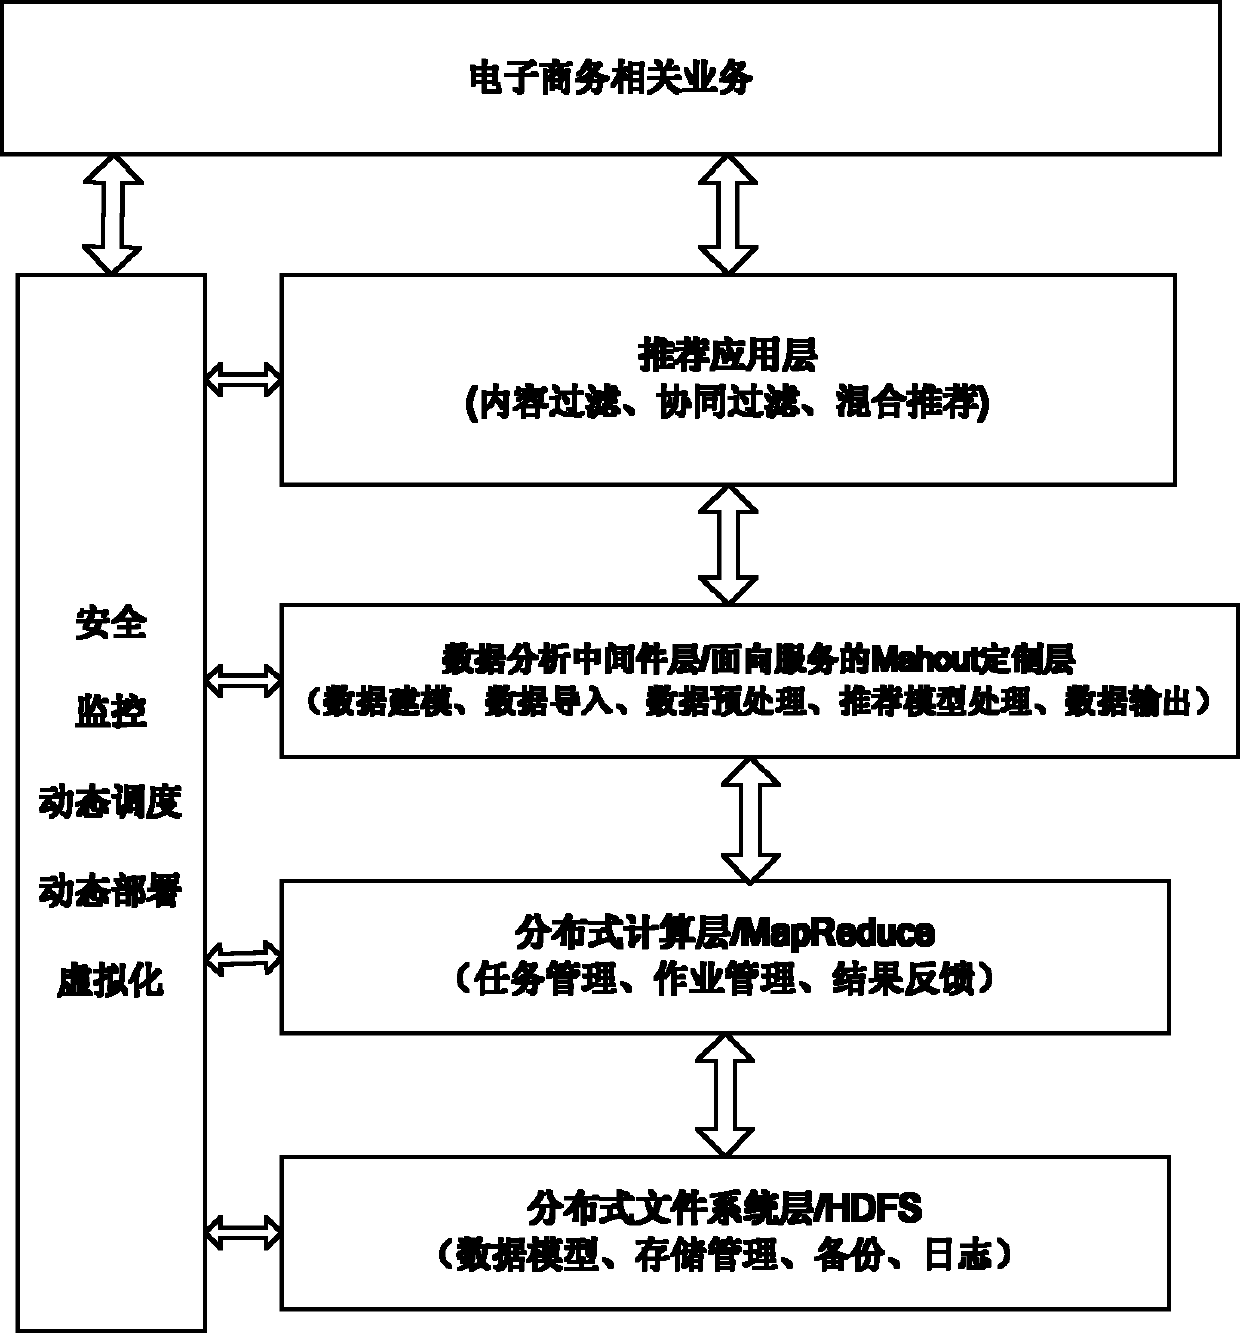 Recommendation system building method based on cloud computing